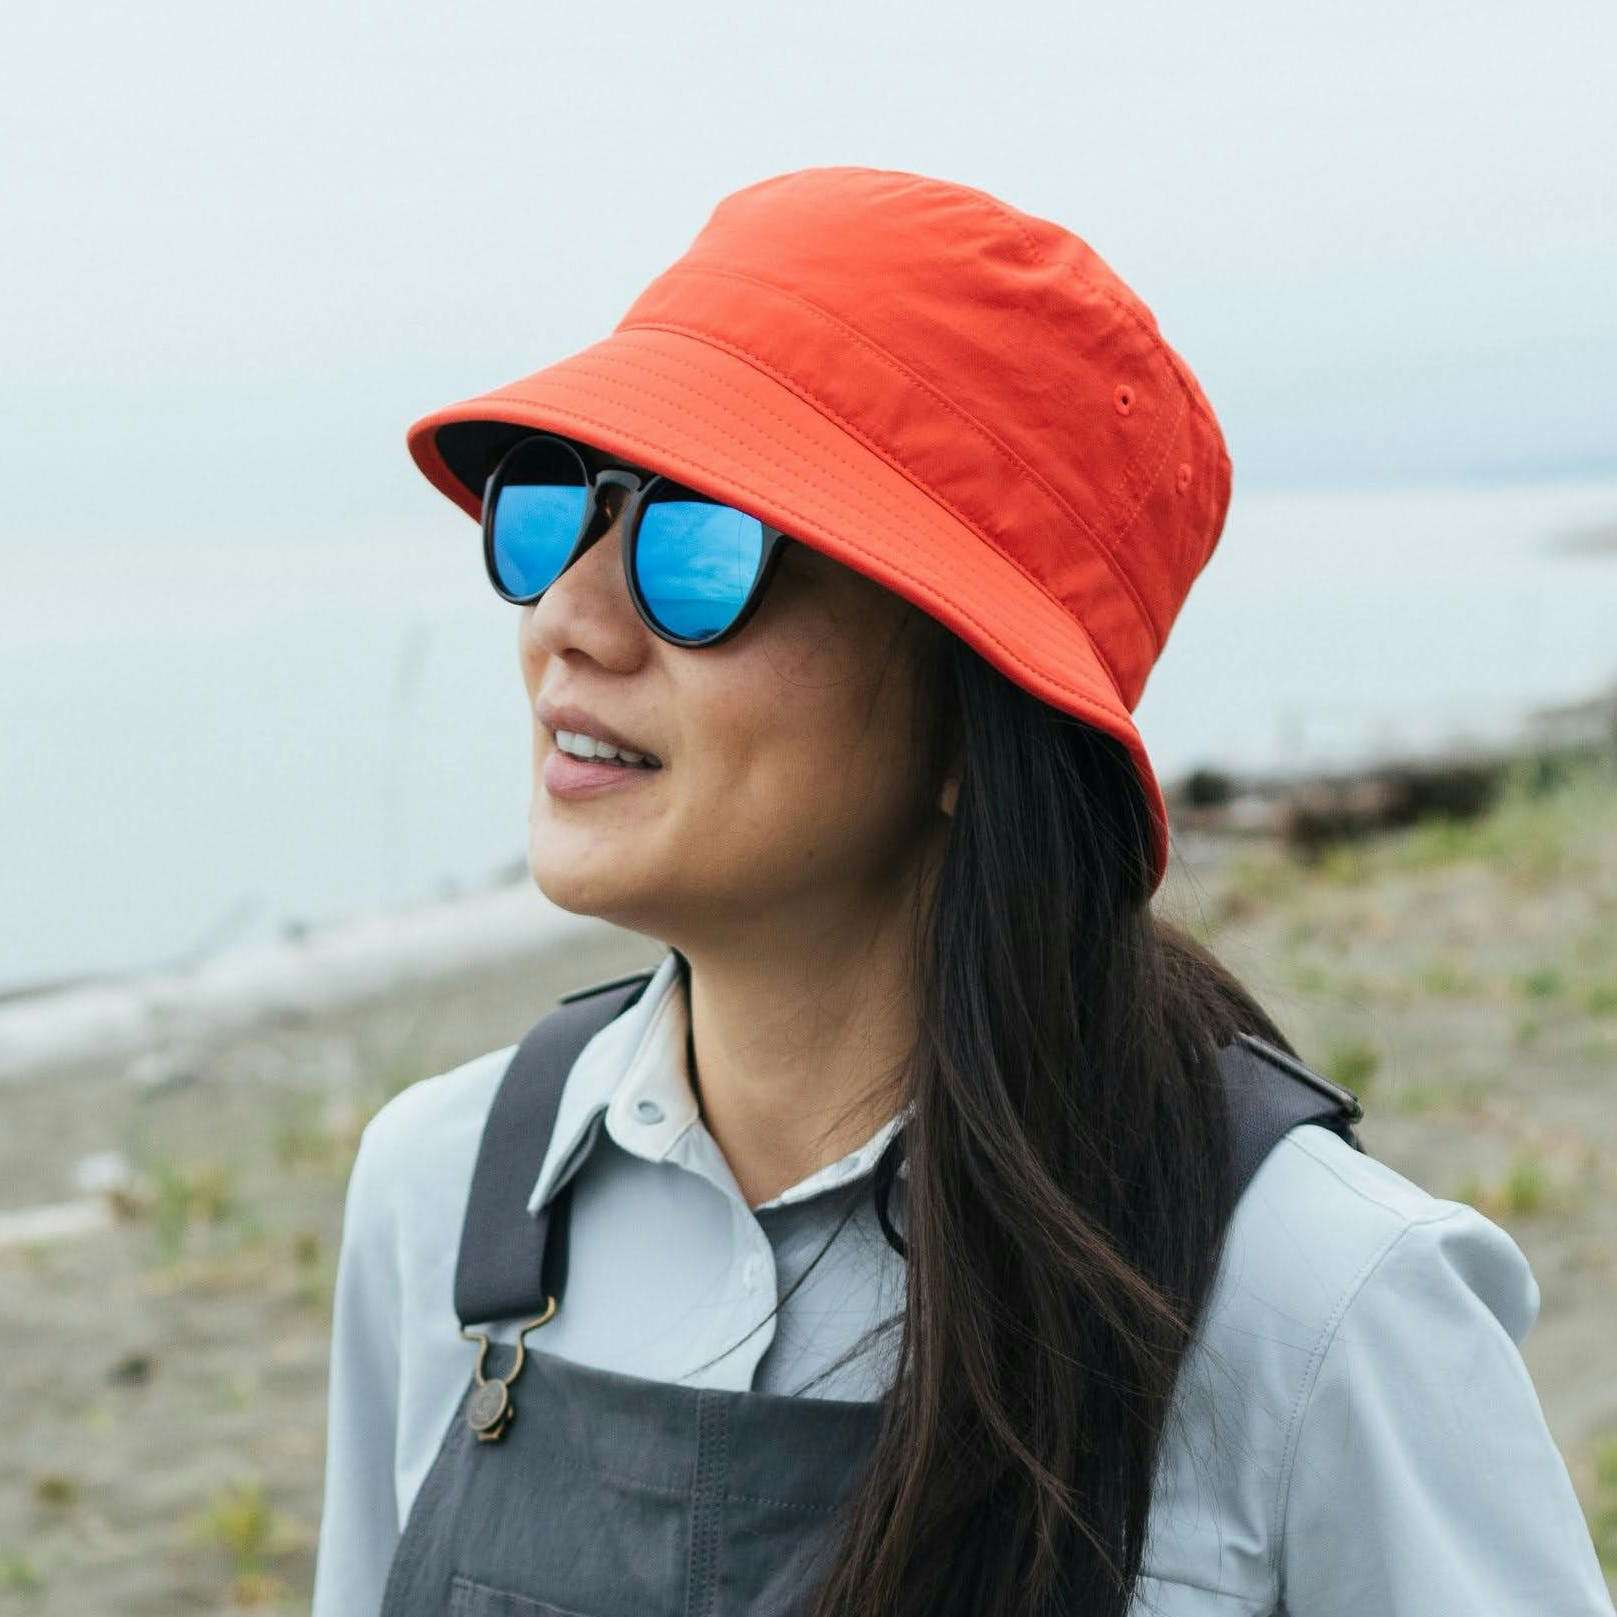 Person wearing sunglasses and a red bucket hat